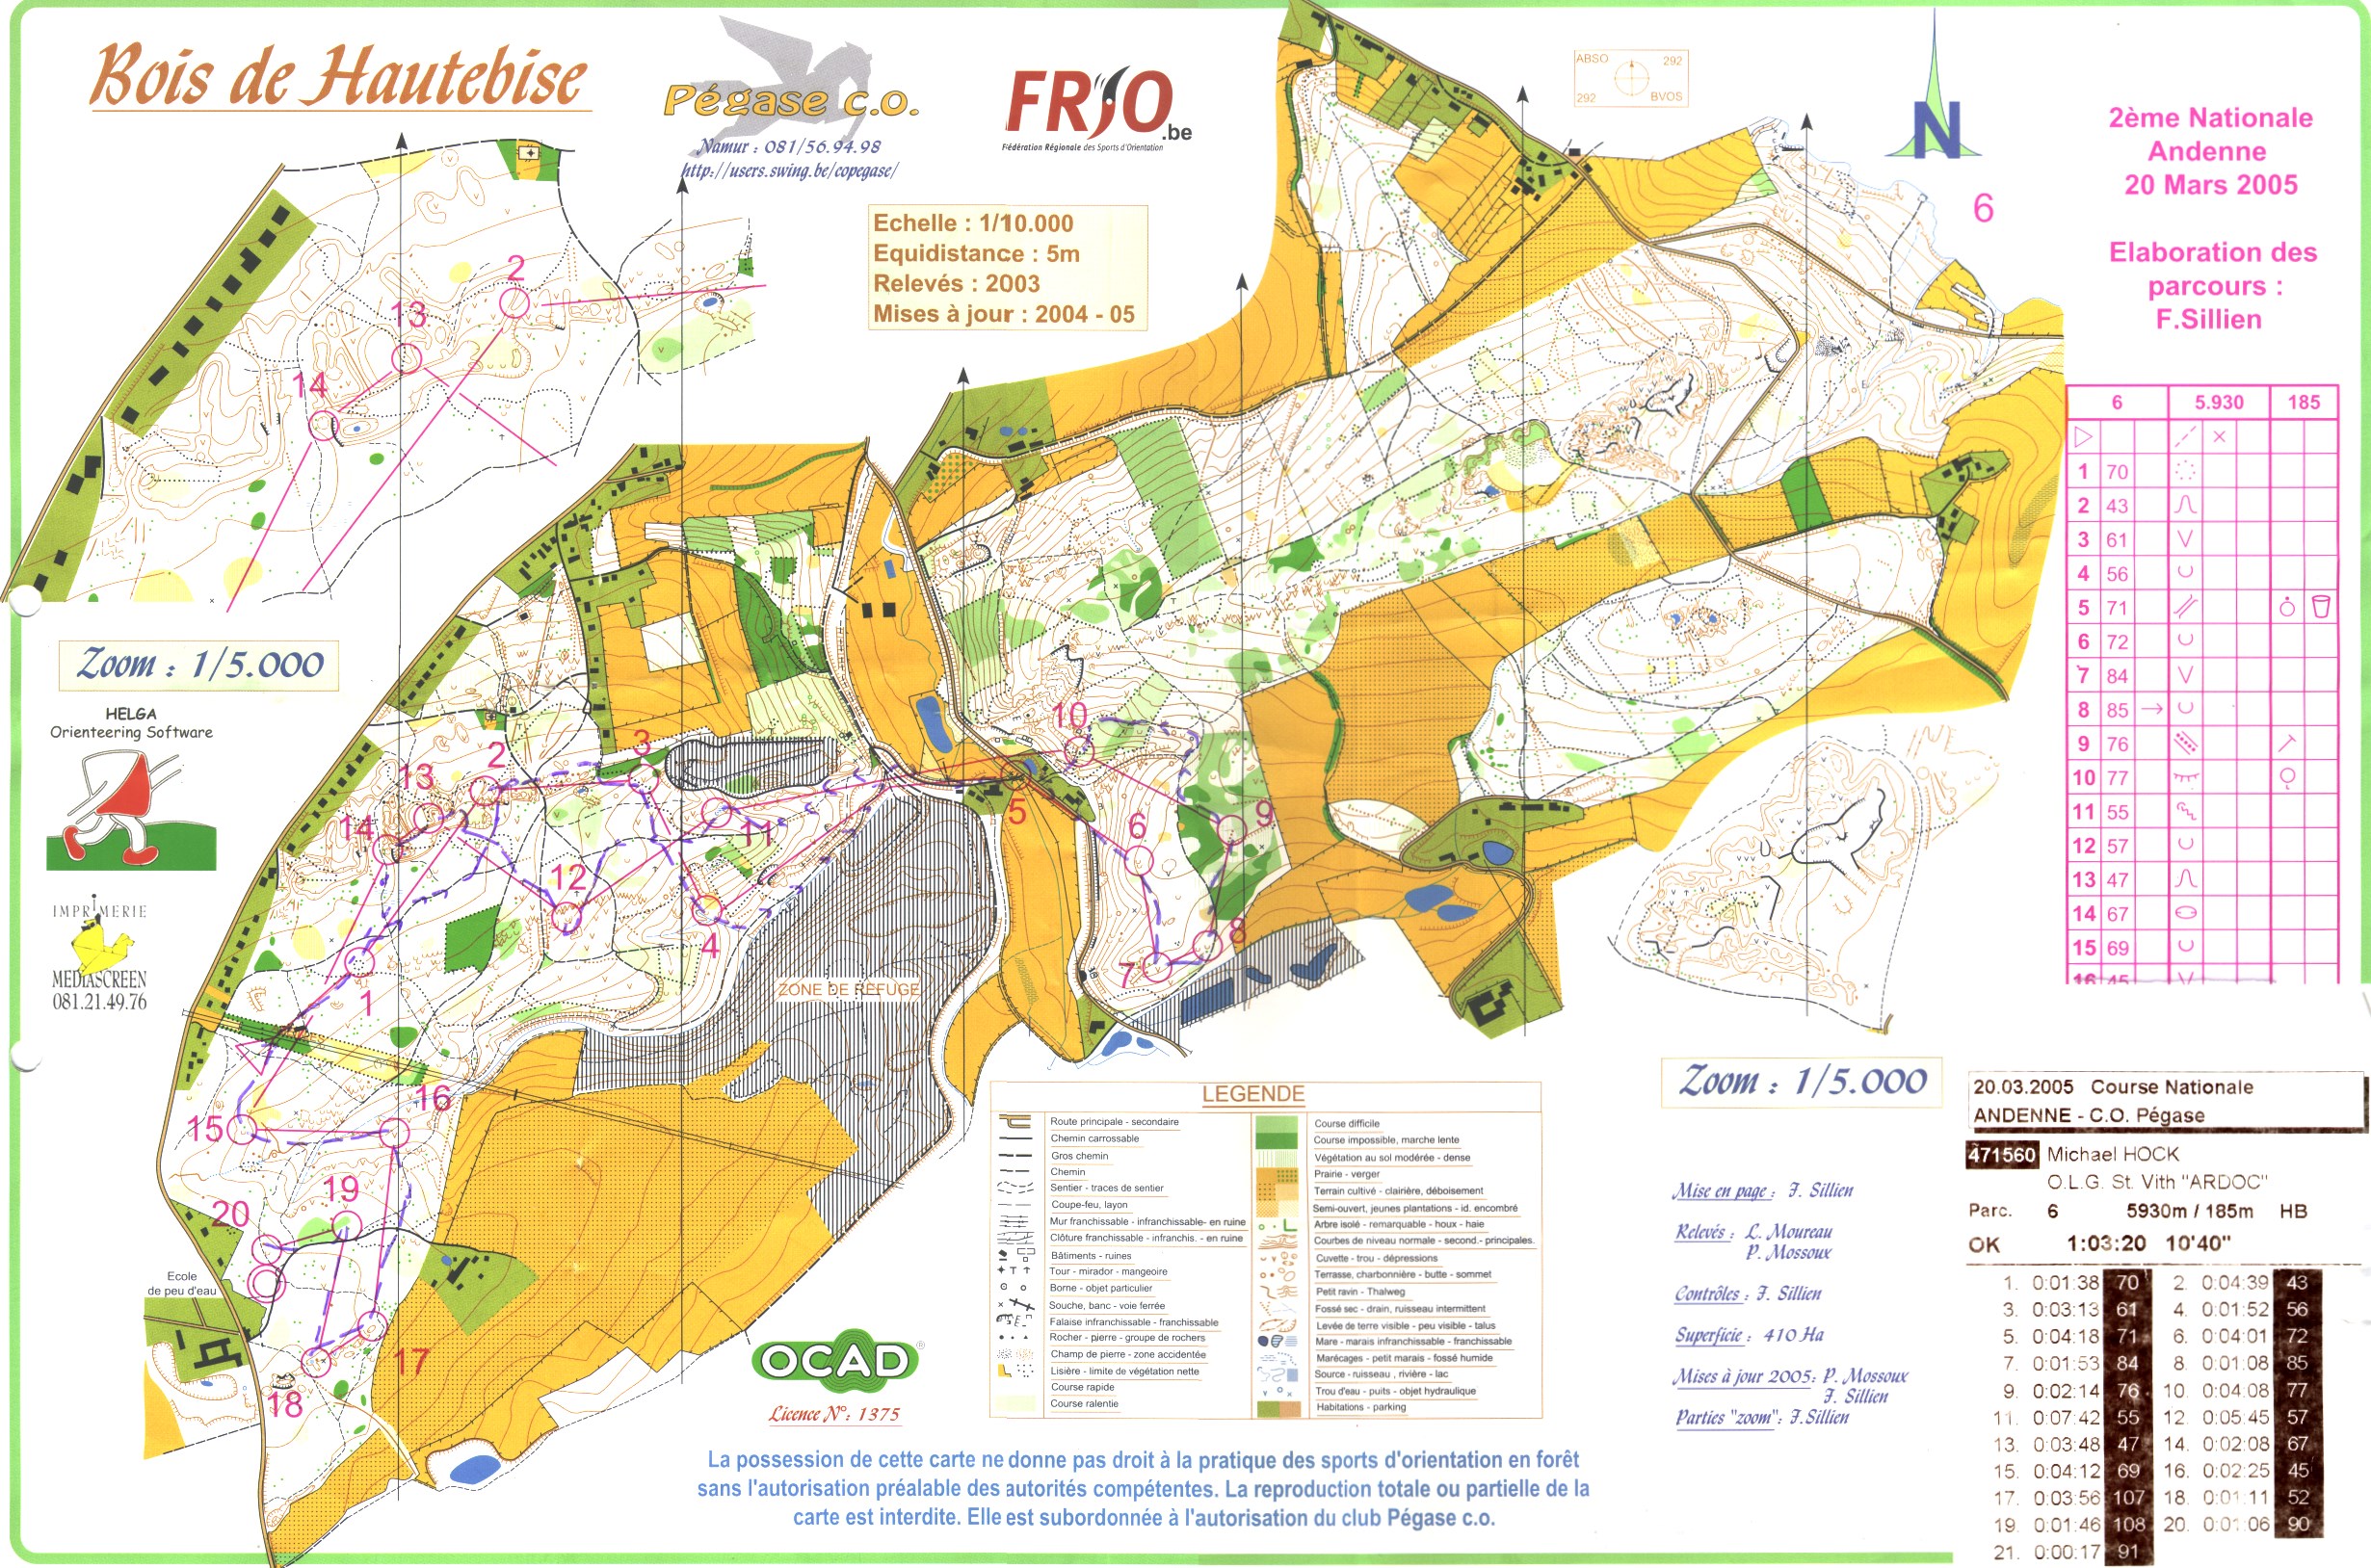 Course Nationale (2005-03-20)